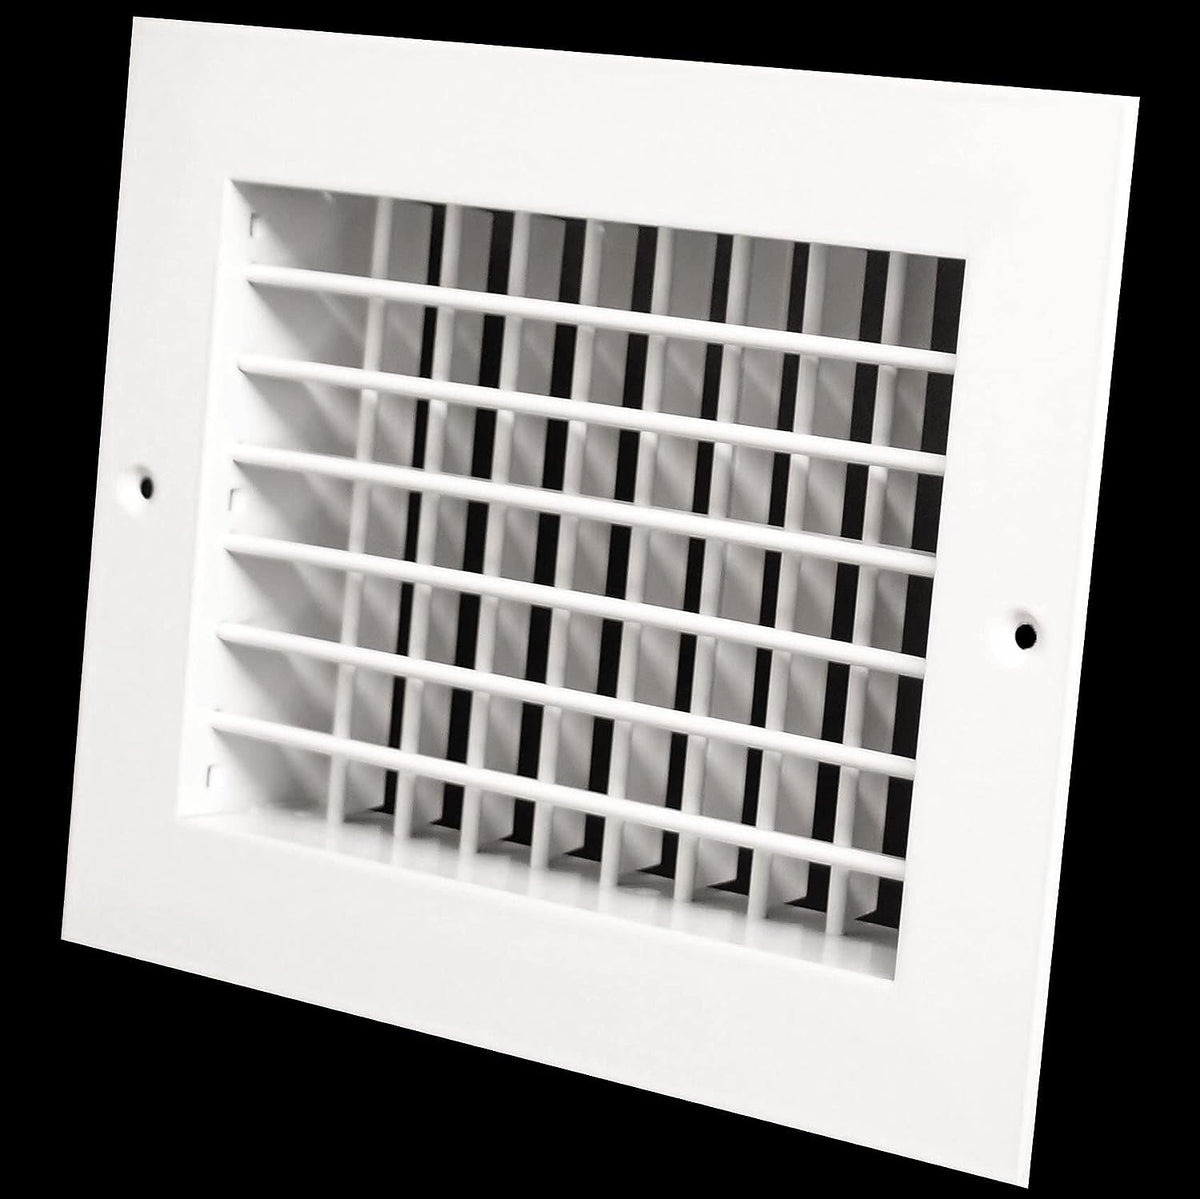 8&quot;w X 6&quot;h Aluminum Double Deflection Adjustable Air Supply HVAC Diffuser - Full Control Vertical/Horizontal Airflow Direction